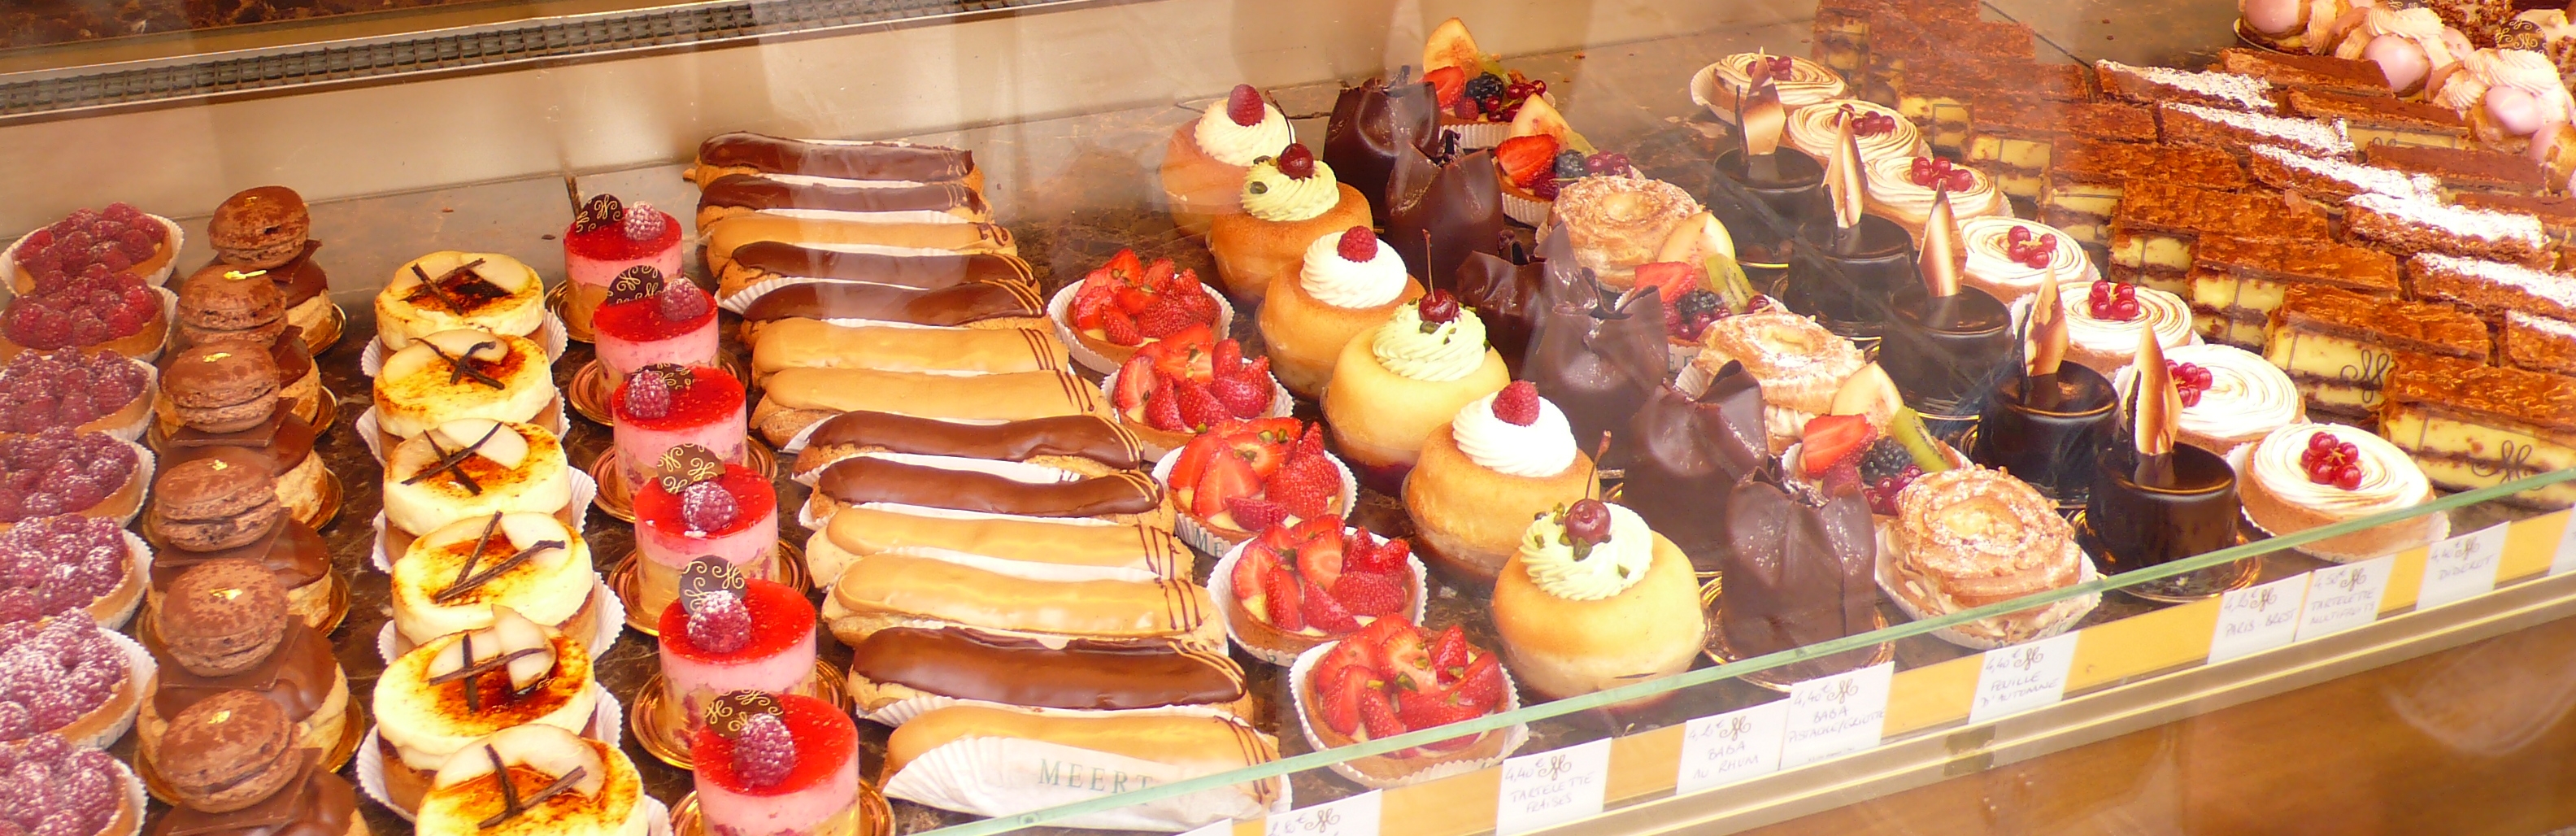 pastry assortment image